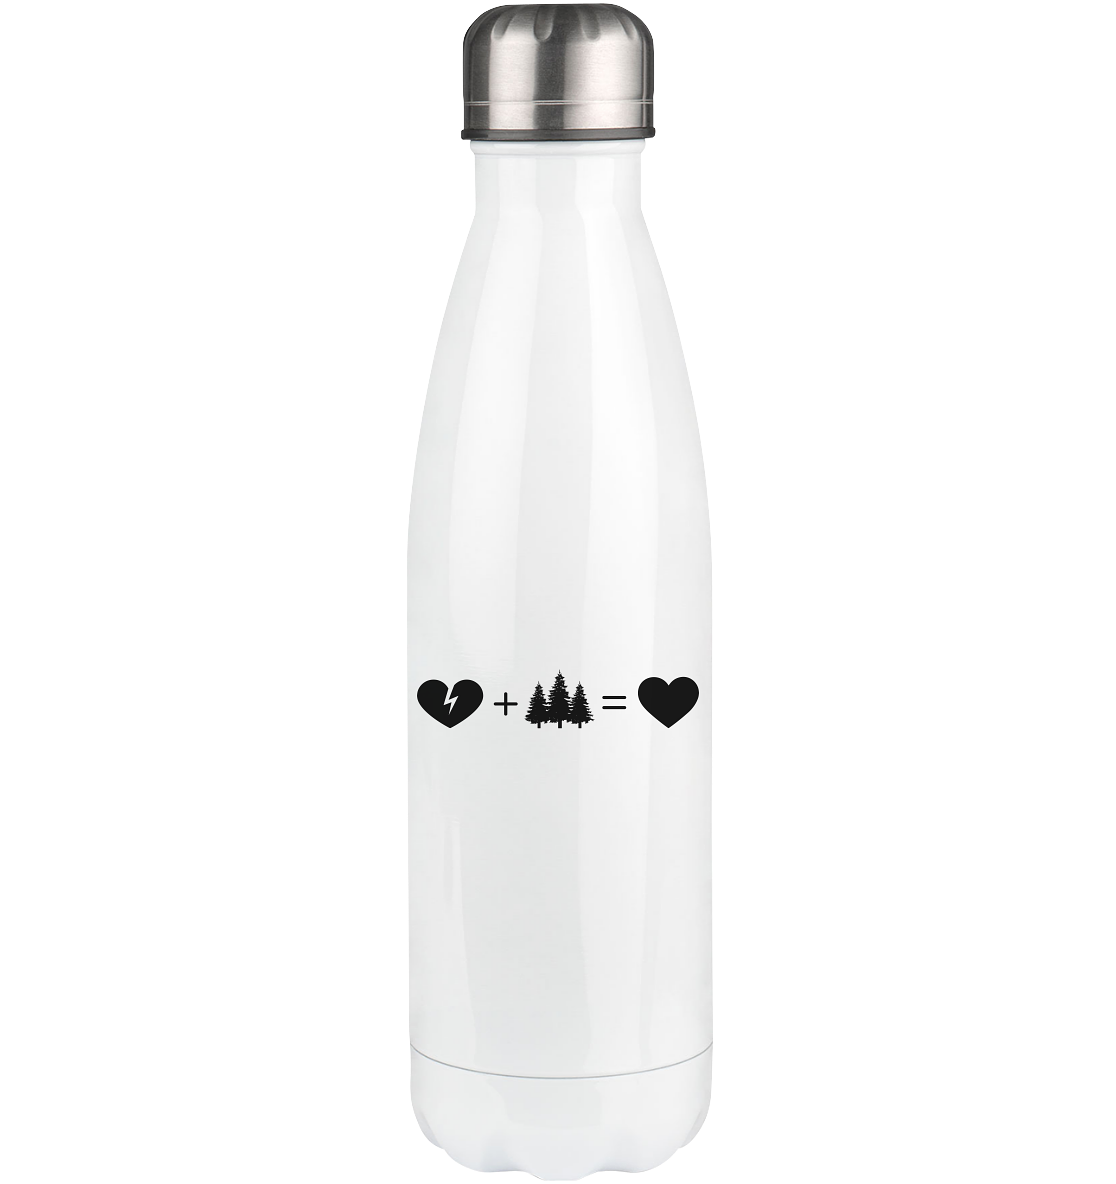 Broken Heart Heart and Snowboarding 3 - Edelstahl Thermosflasche camping UONP 500ml